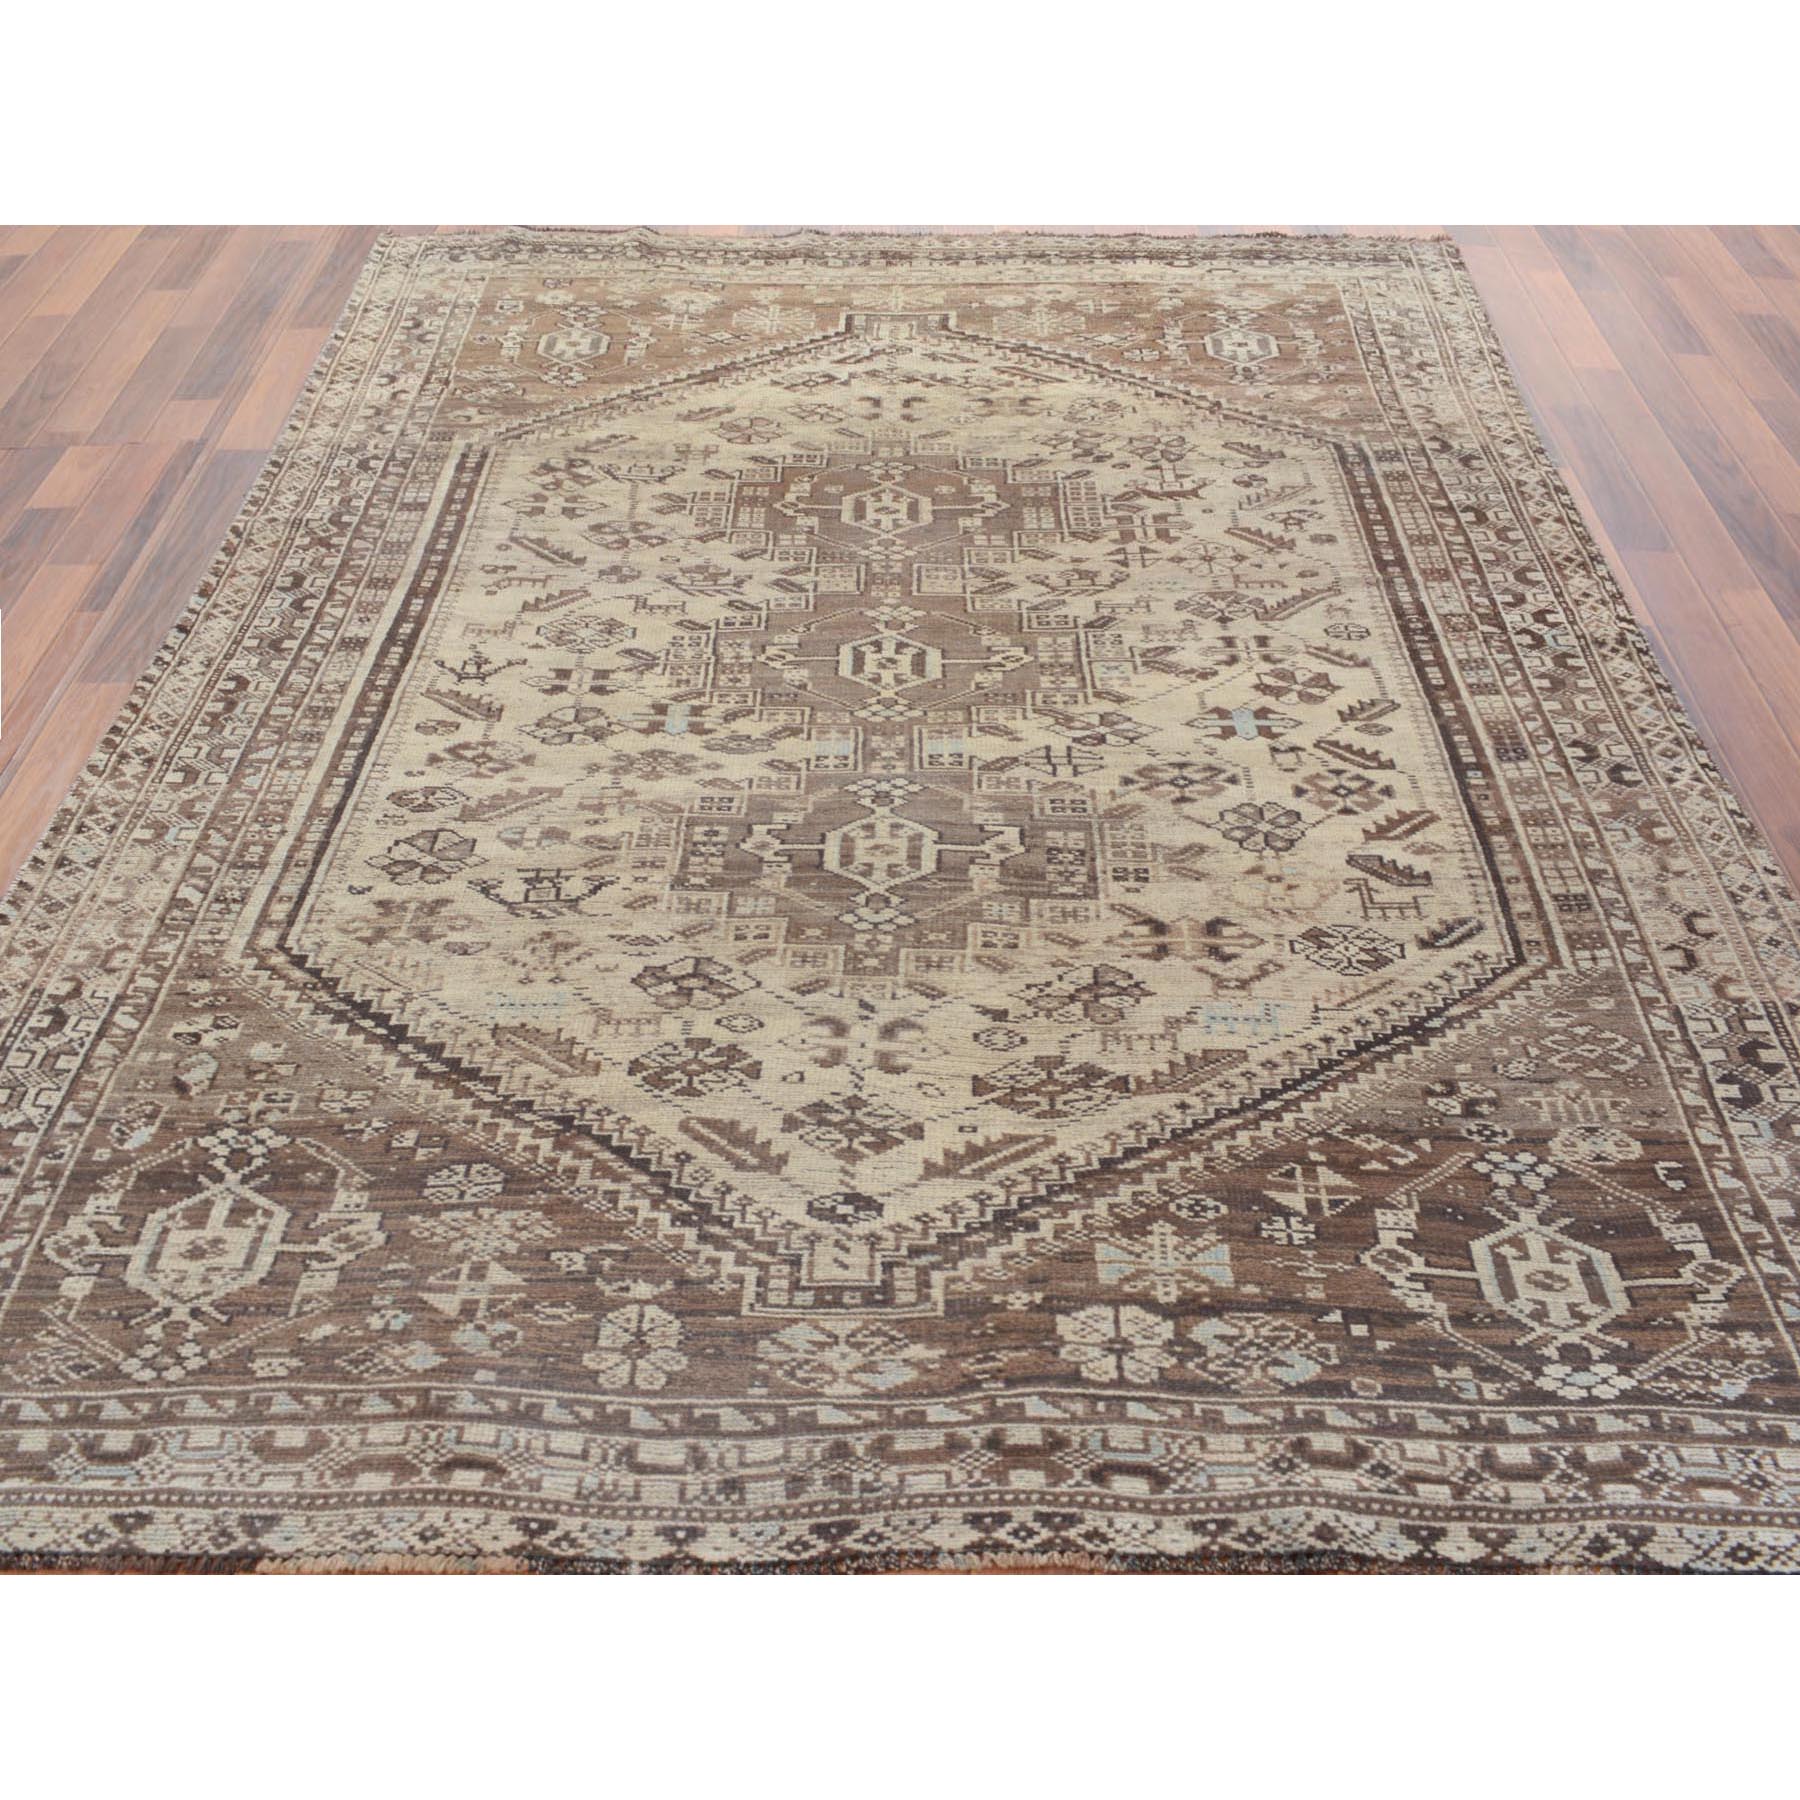 6-4 x8-10  Brown Old And Worn Down Persian Qashqai Pure Wool Hand Knotted Oriental Rug 